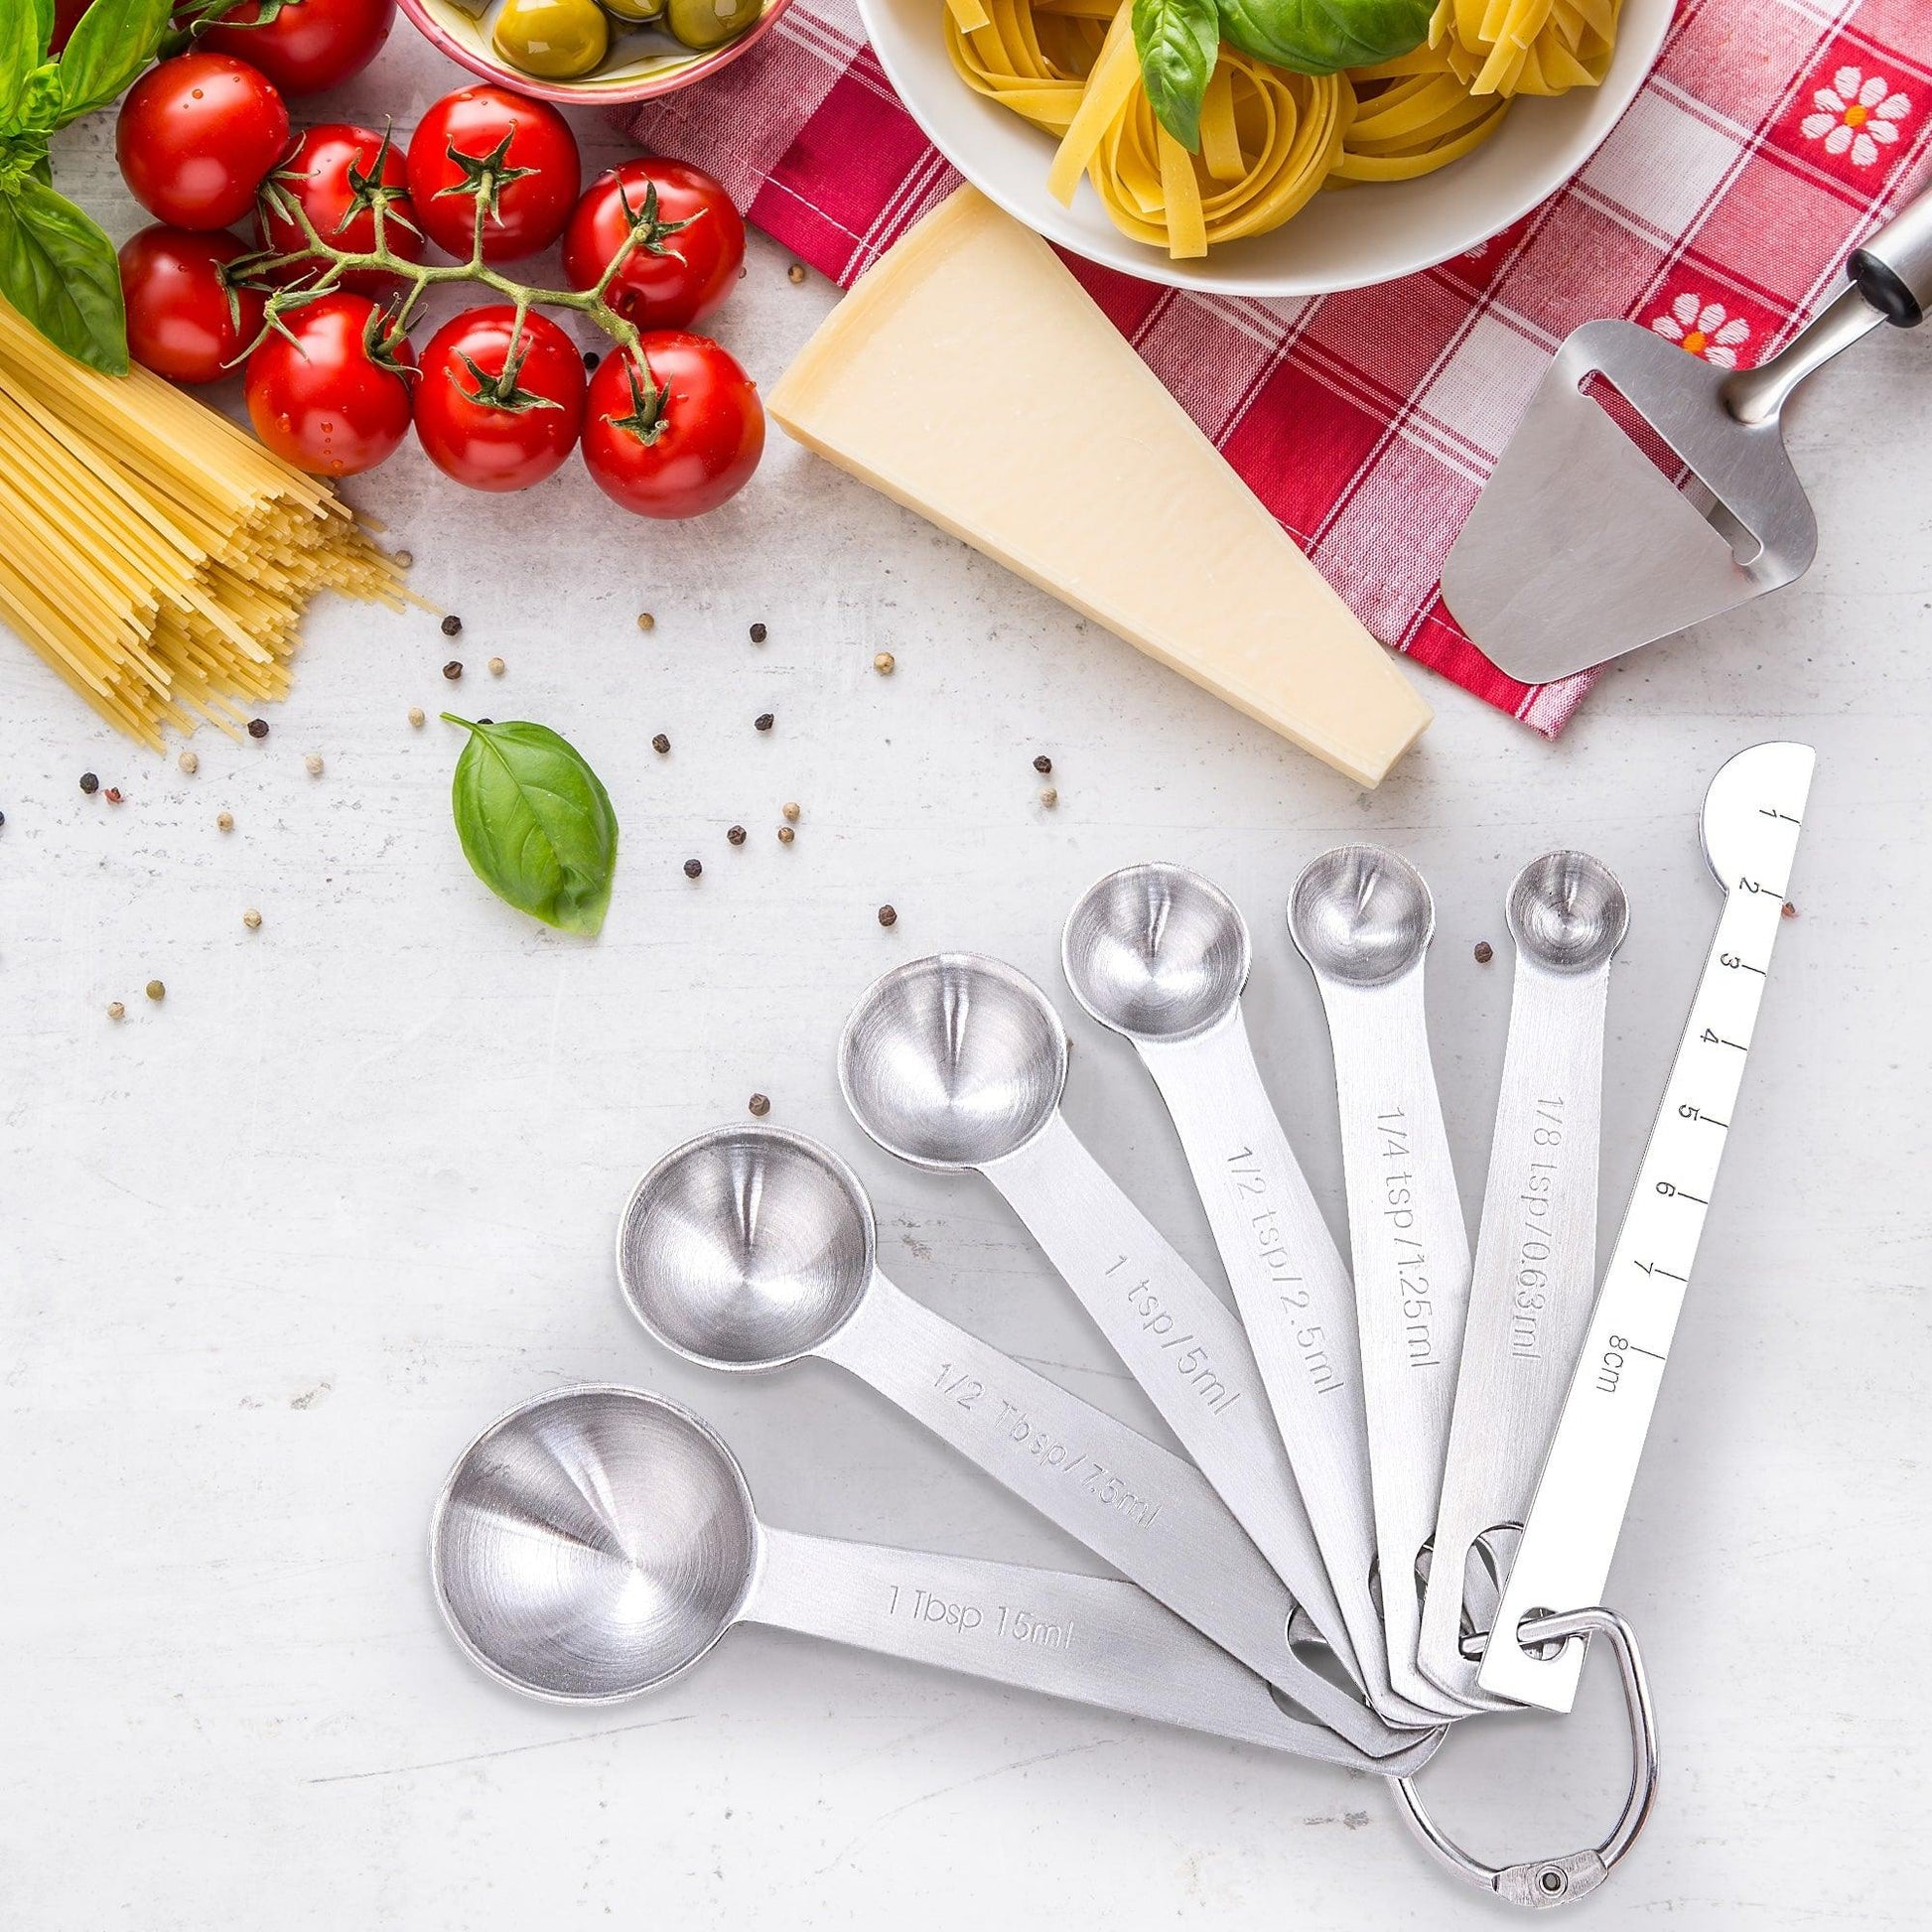 Standard 15ml Tablespoon to 1/8 Teaspoon Stainless Steel Measuring Spoons Set with Leveller - RhinoRoo